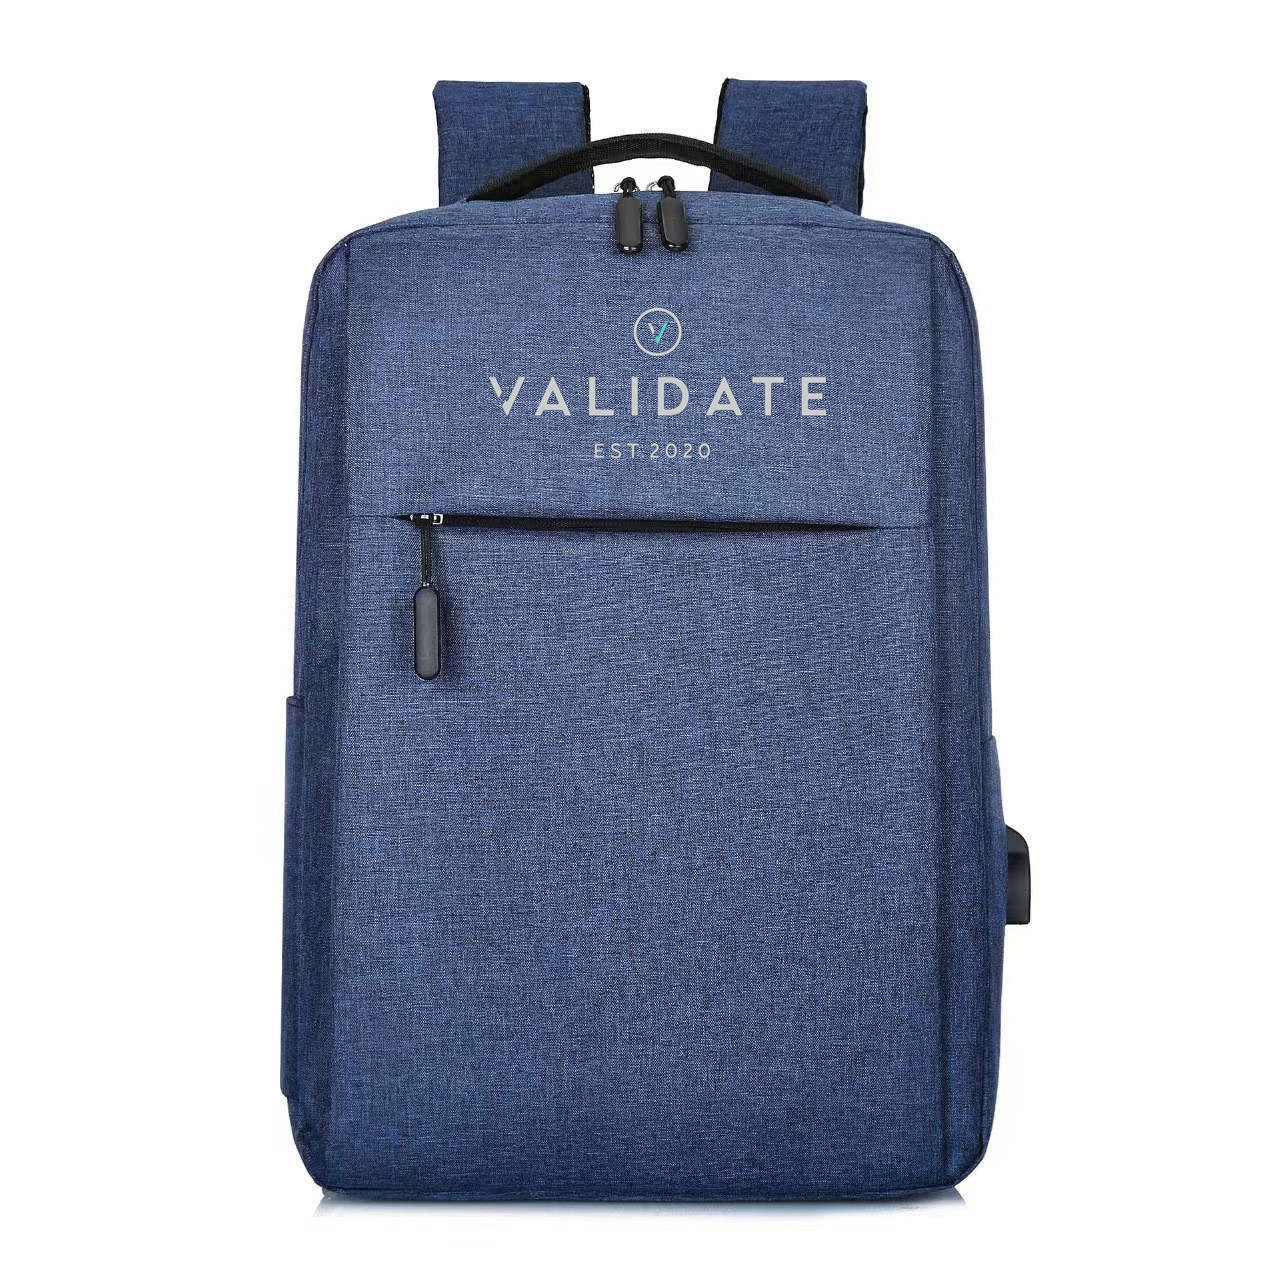 Validate Outdoor Sports Hiking BackPack Navy